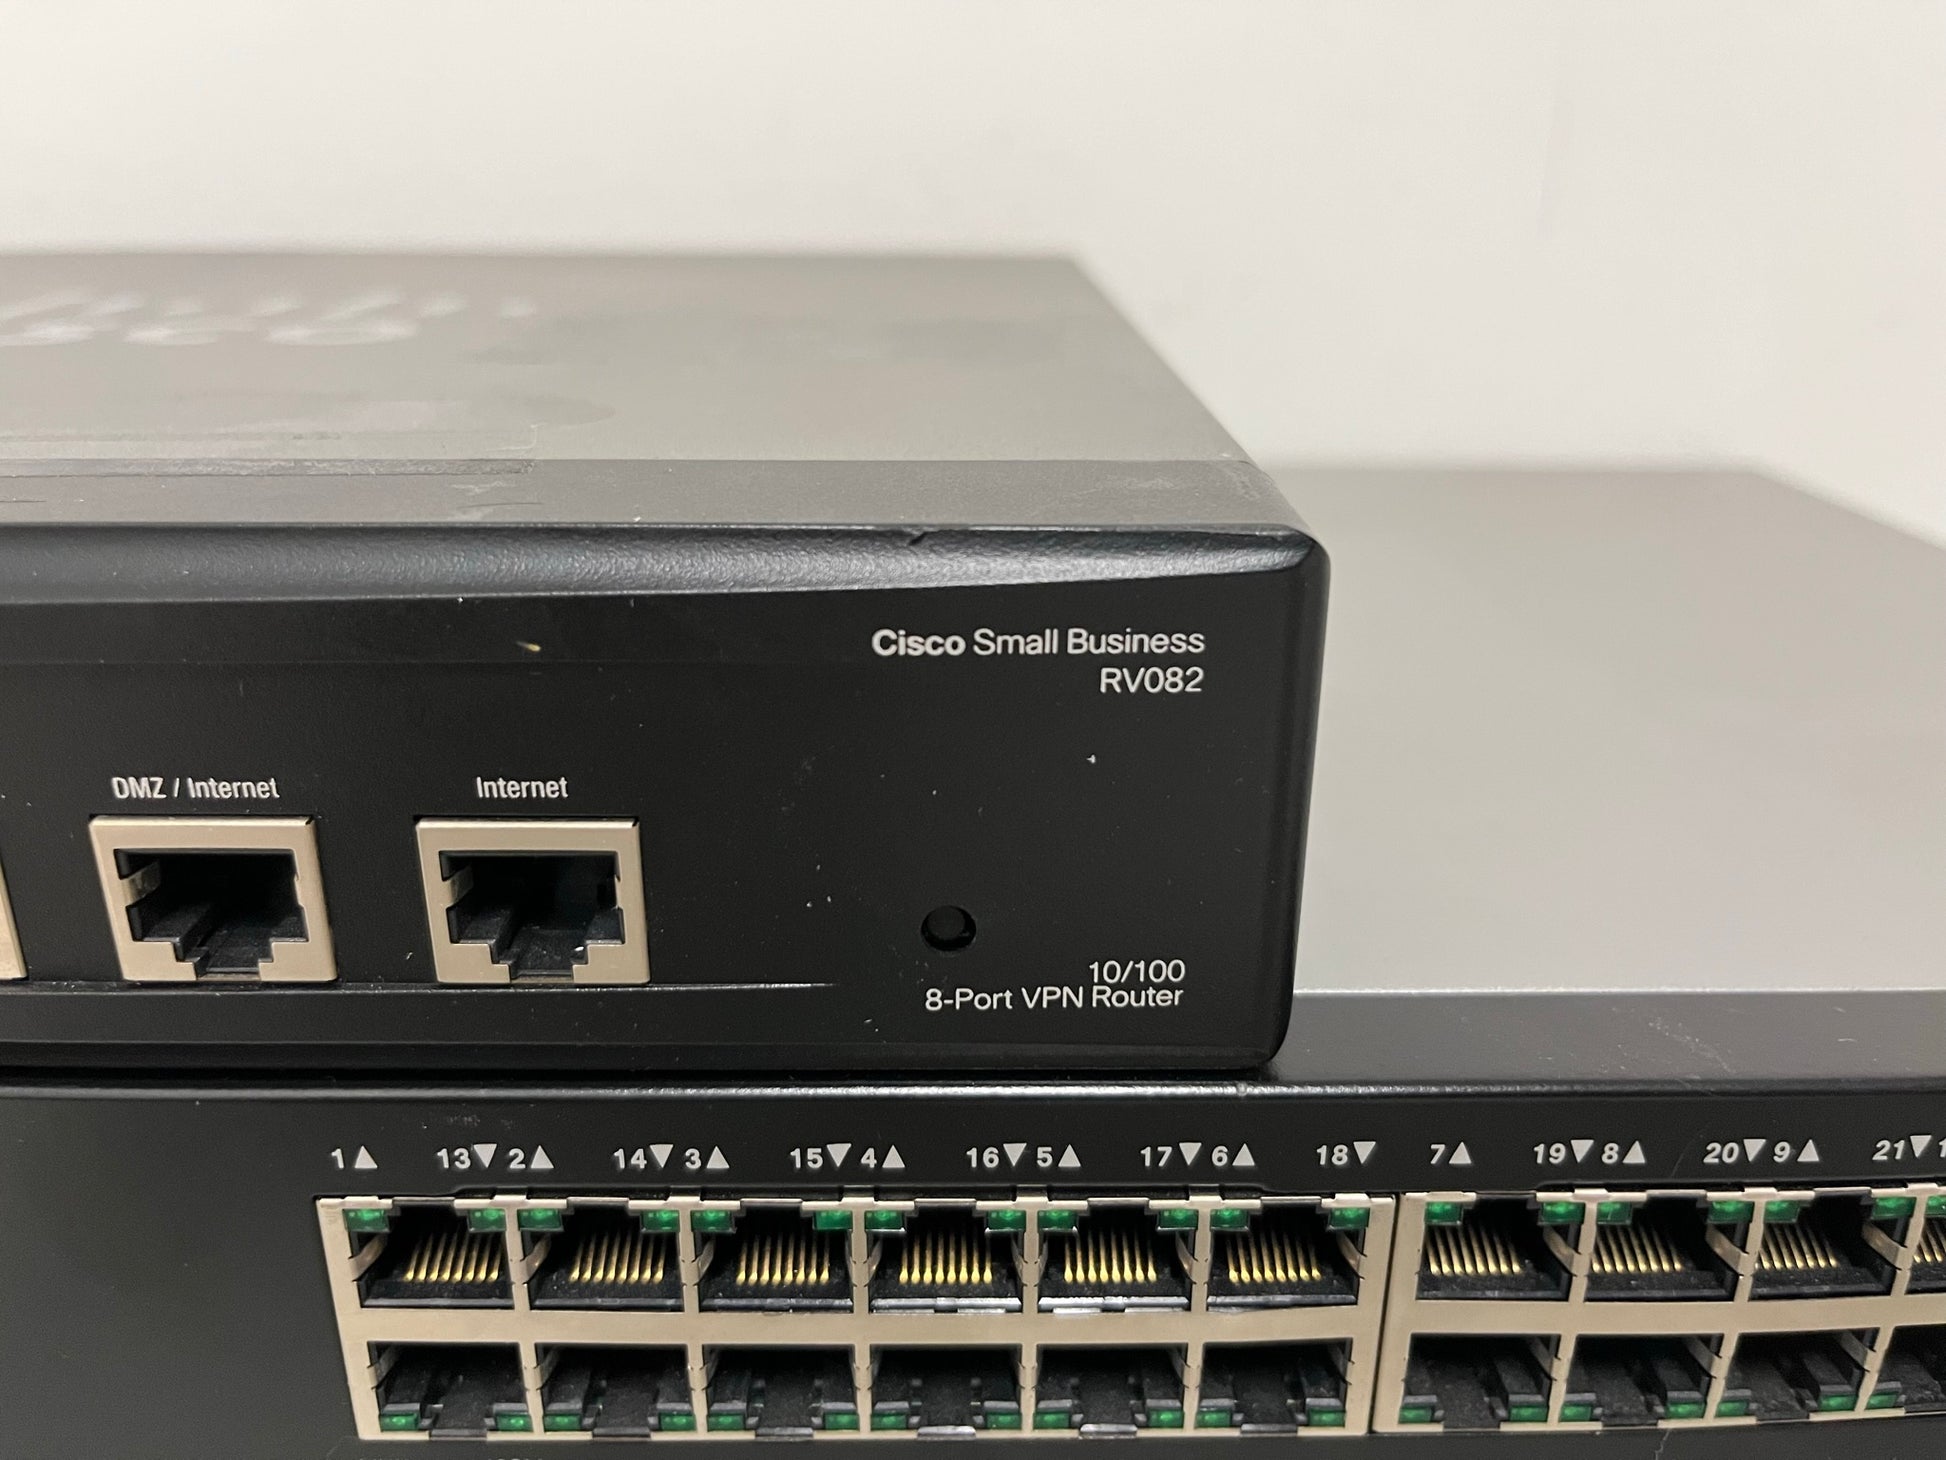 Used Cisco RV082 10/100 8-Port VPN Router &, We Sell Professional Audio Equipment. Audio Systems, Amplifiers, Consoles, Mixers, Electronics, Entertainment, Sound, Live